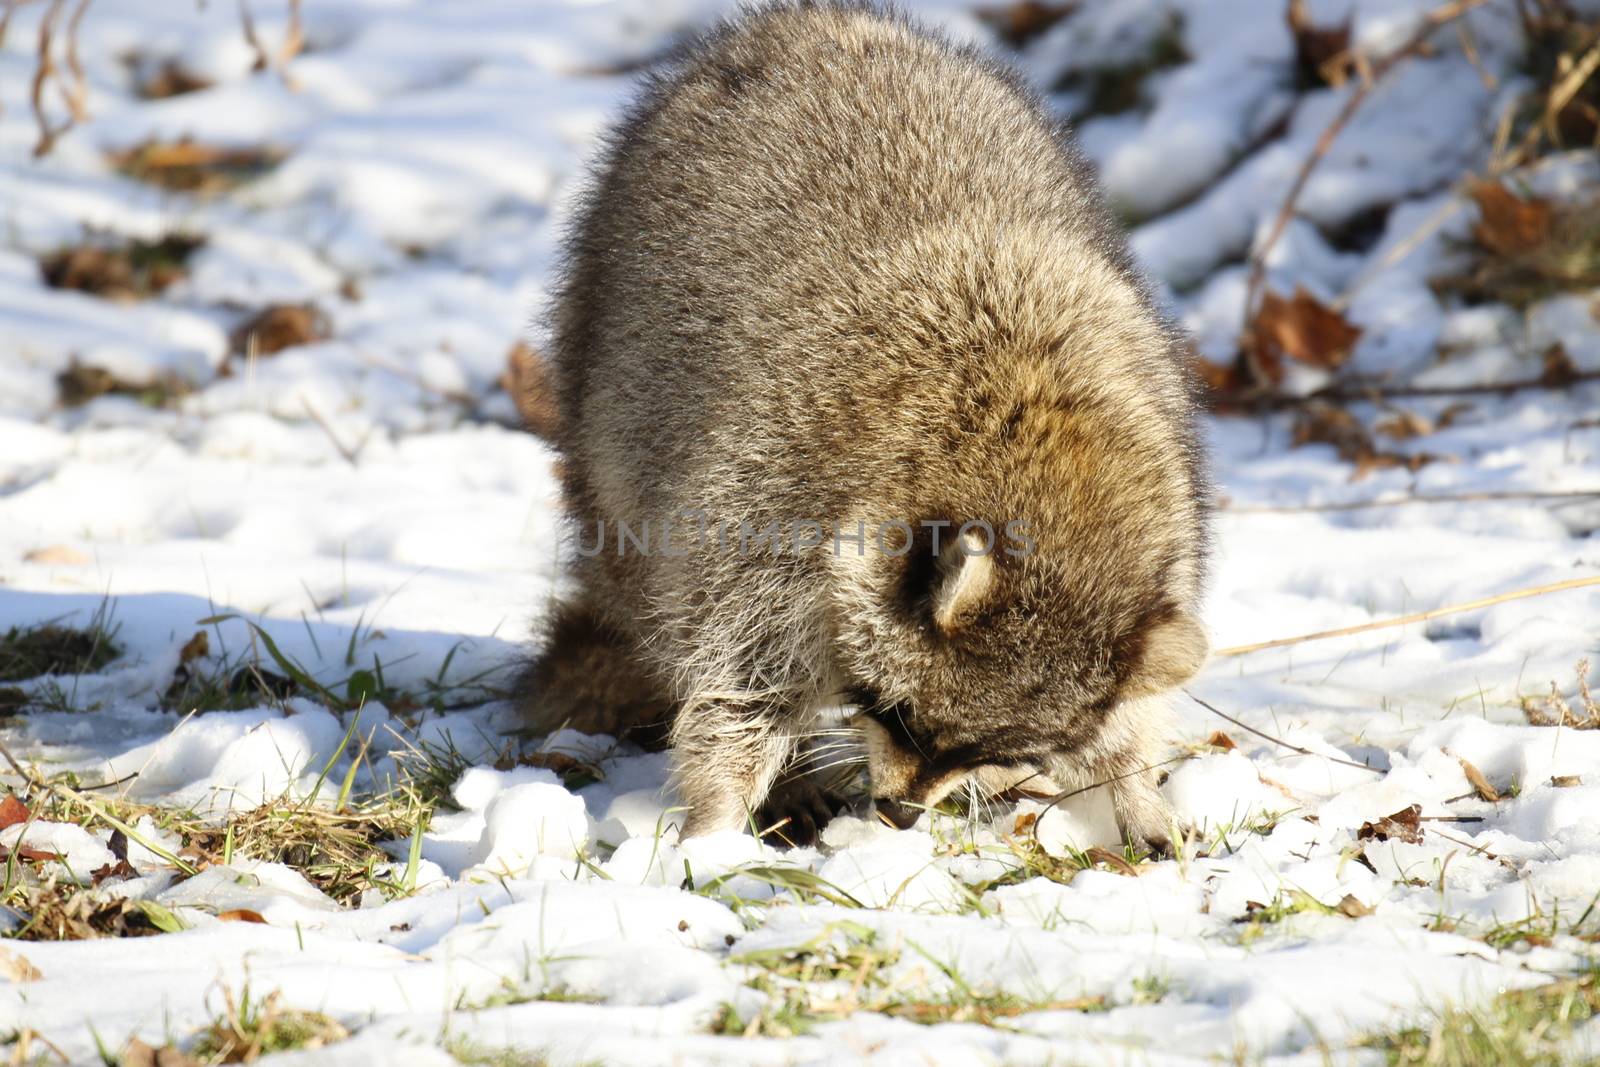 Rabid Raccoon foaming at the mouth. While this particular raccoon may not be rabid, a wet sick raccoon foaming at the mouth is a sign of rabies. Rabies is deadly. by mynewturtle1